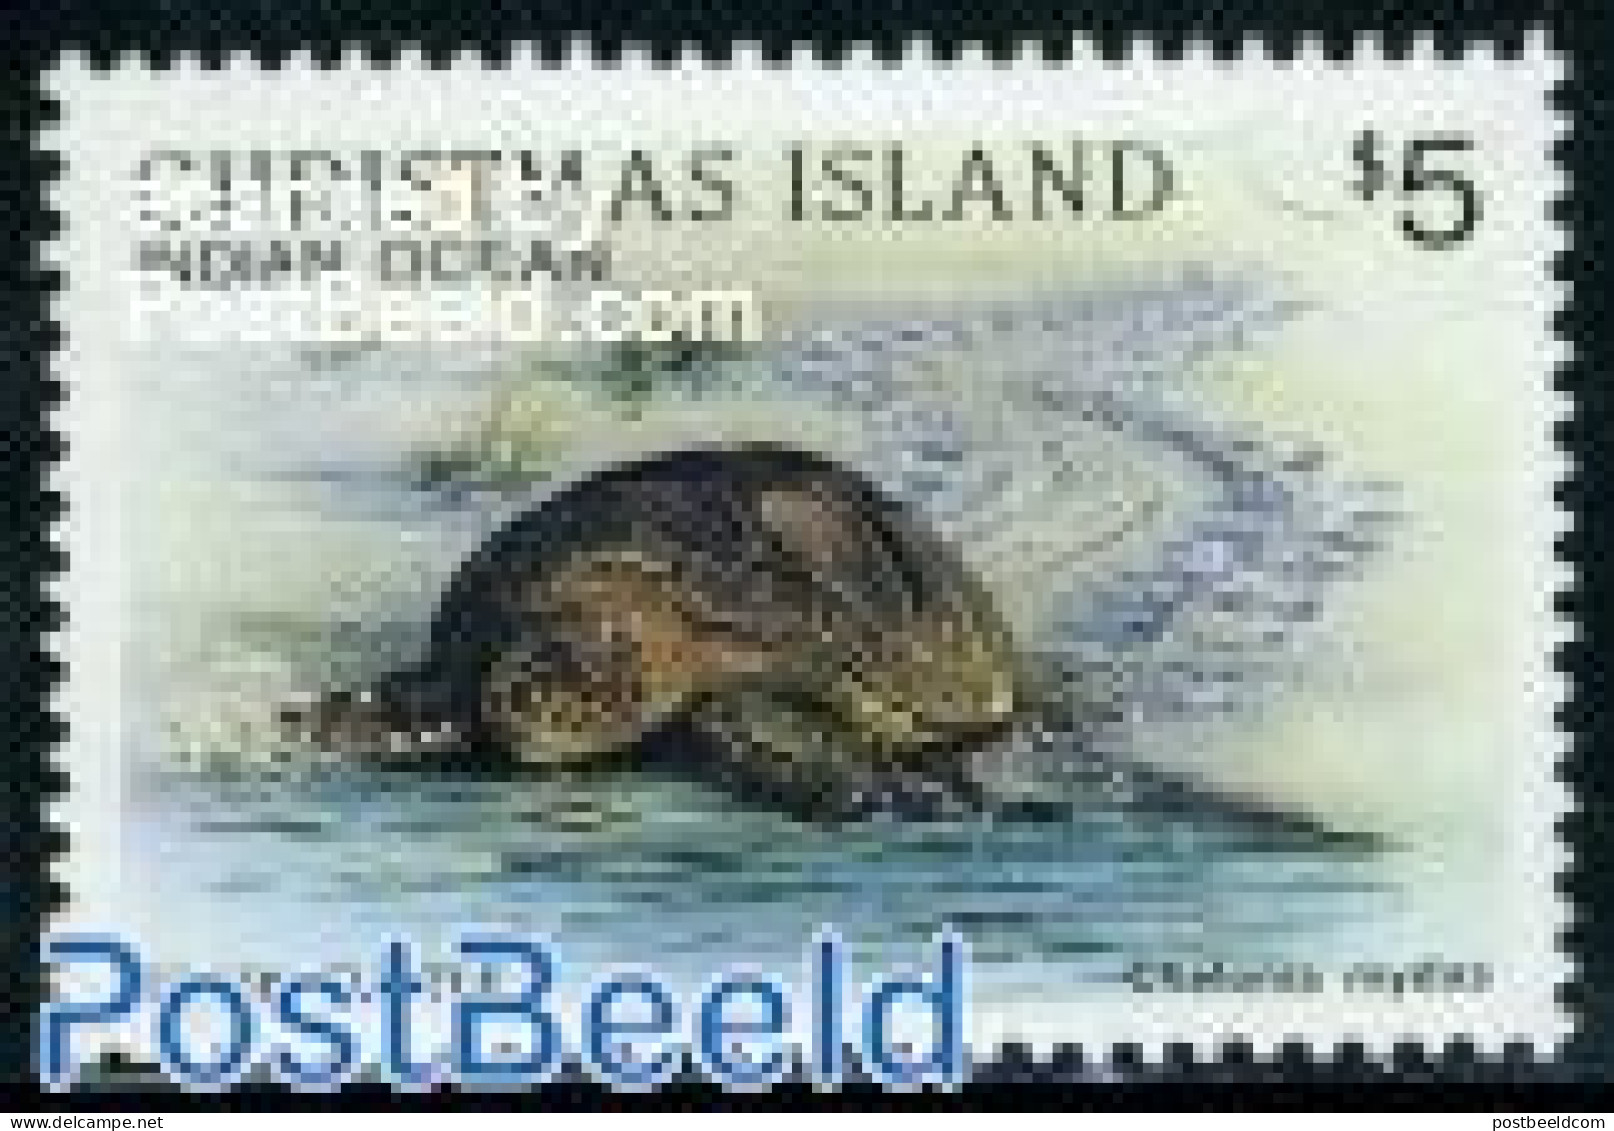 Christmas Islands 1987 Stamp Out Of Set, Mint NH, Nature - Reptiles - Turtles - Christmaseiland